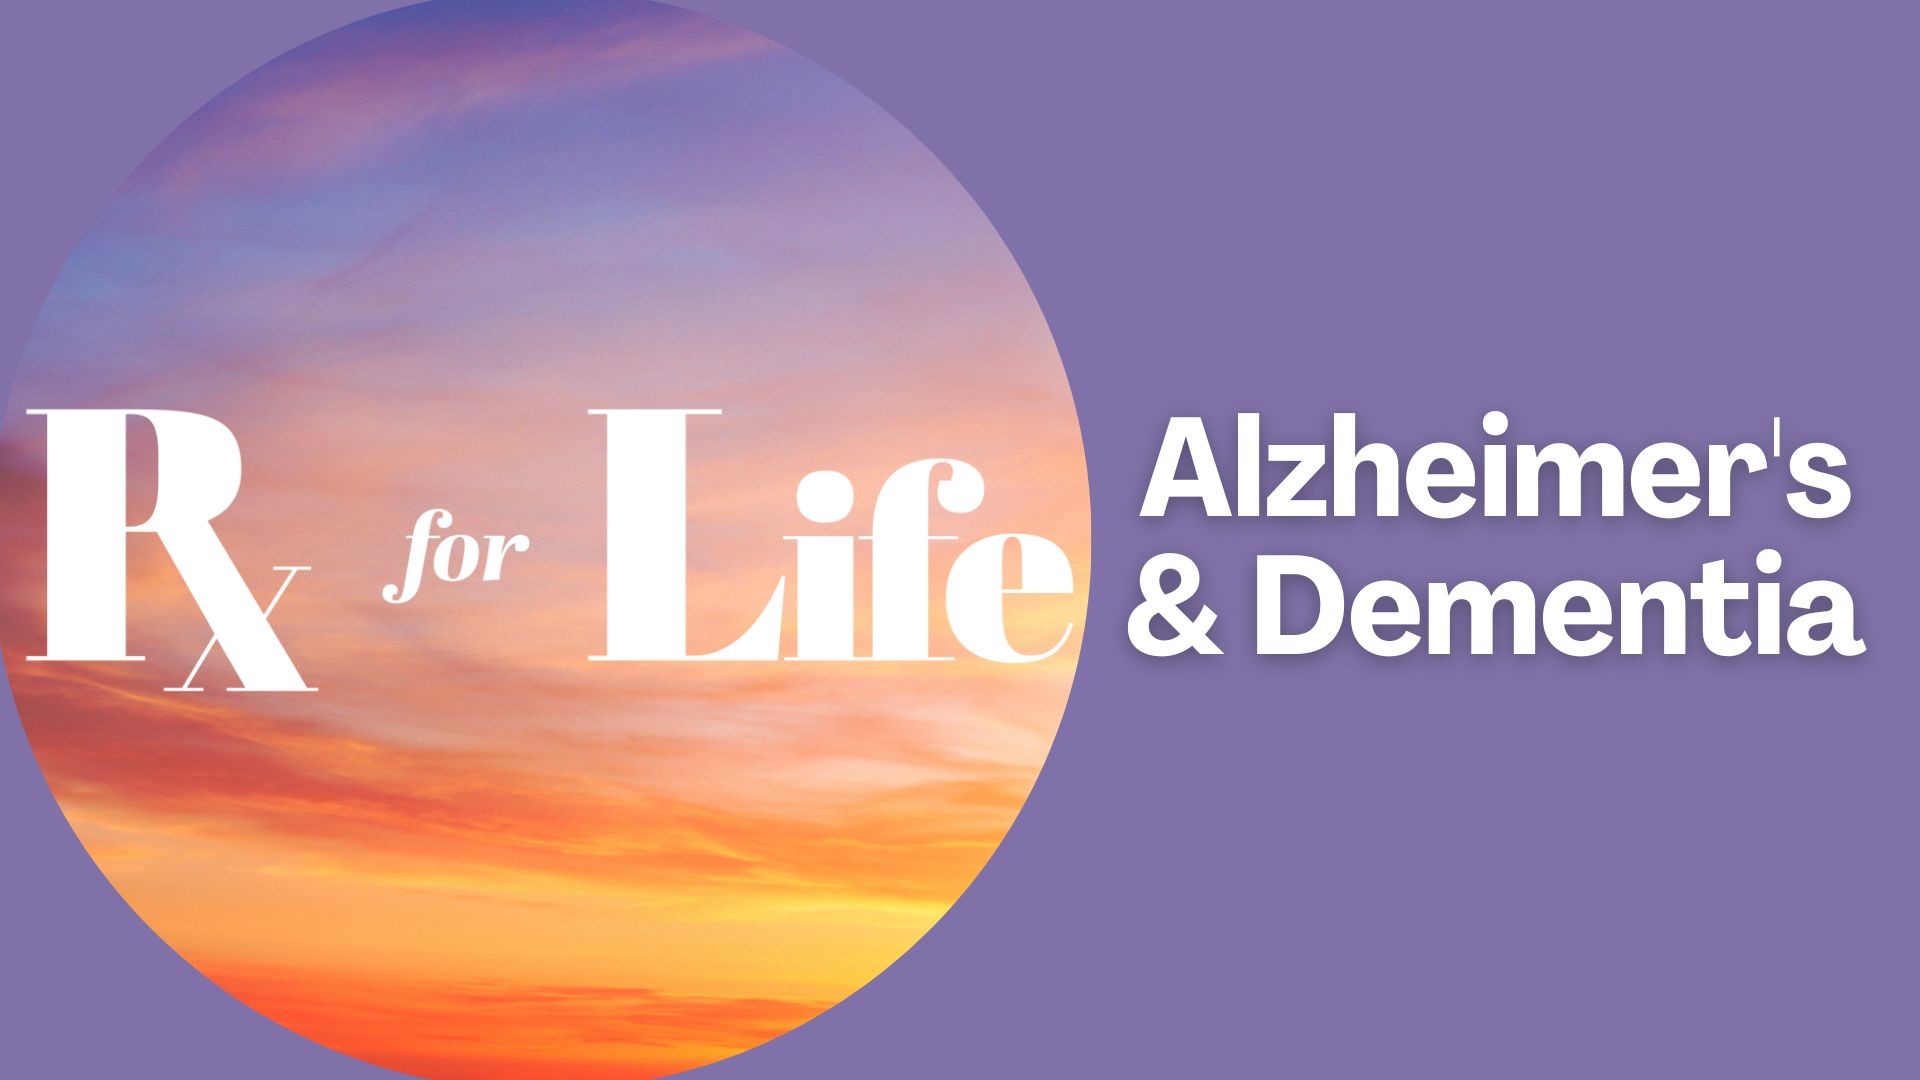 Monica Robins sits down with a Cleveland Clinic doctor to discuss the signs and symptoms of Alzheimer's and dementia, as well as new treatments available.